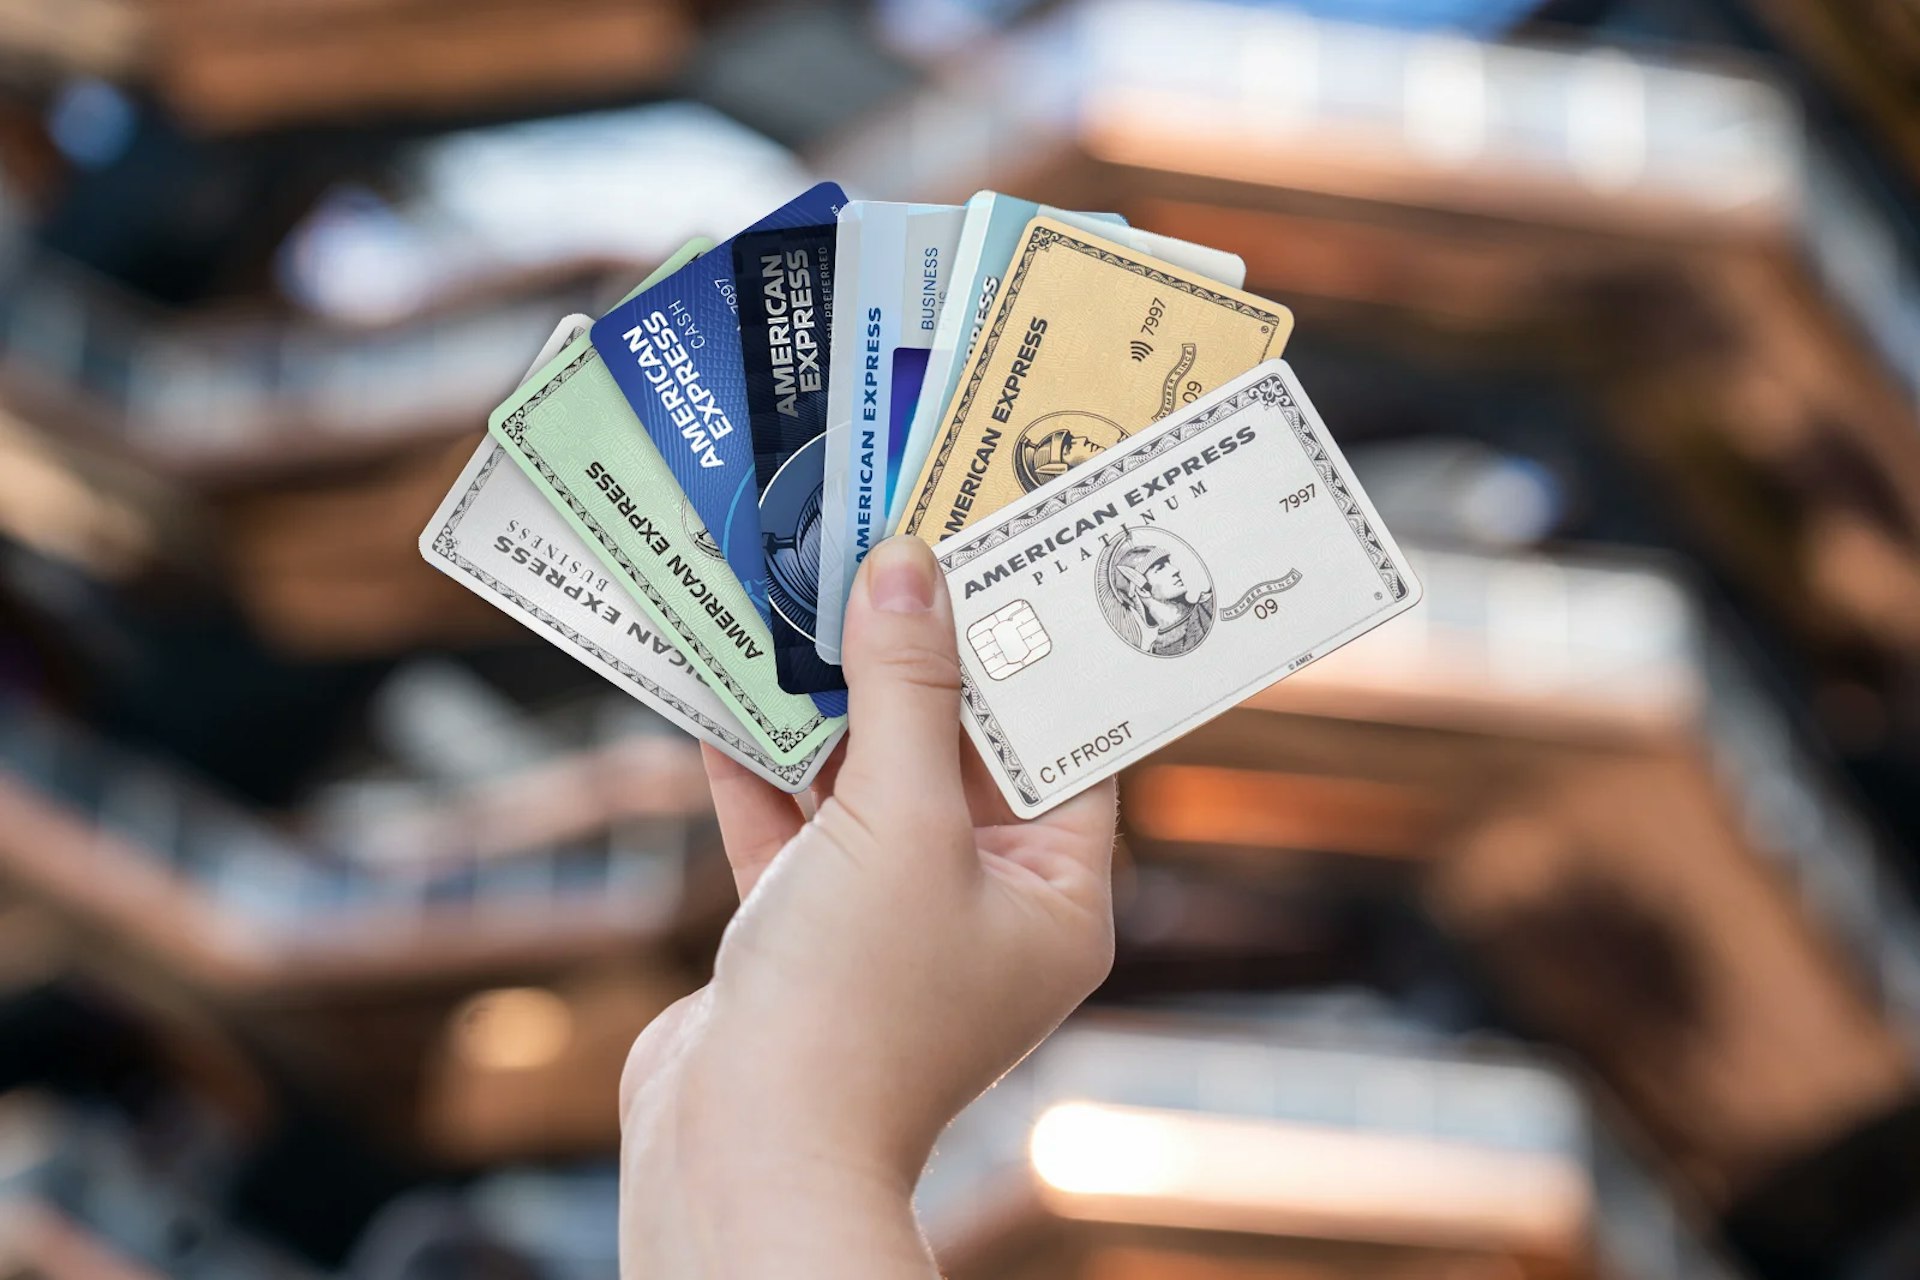 A variety of American Express cards